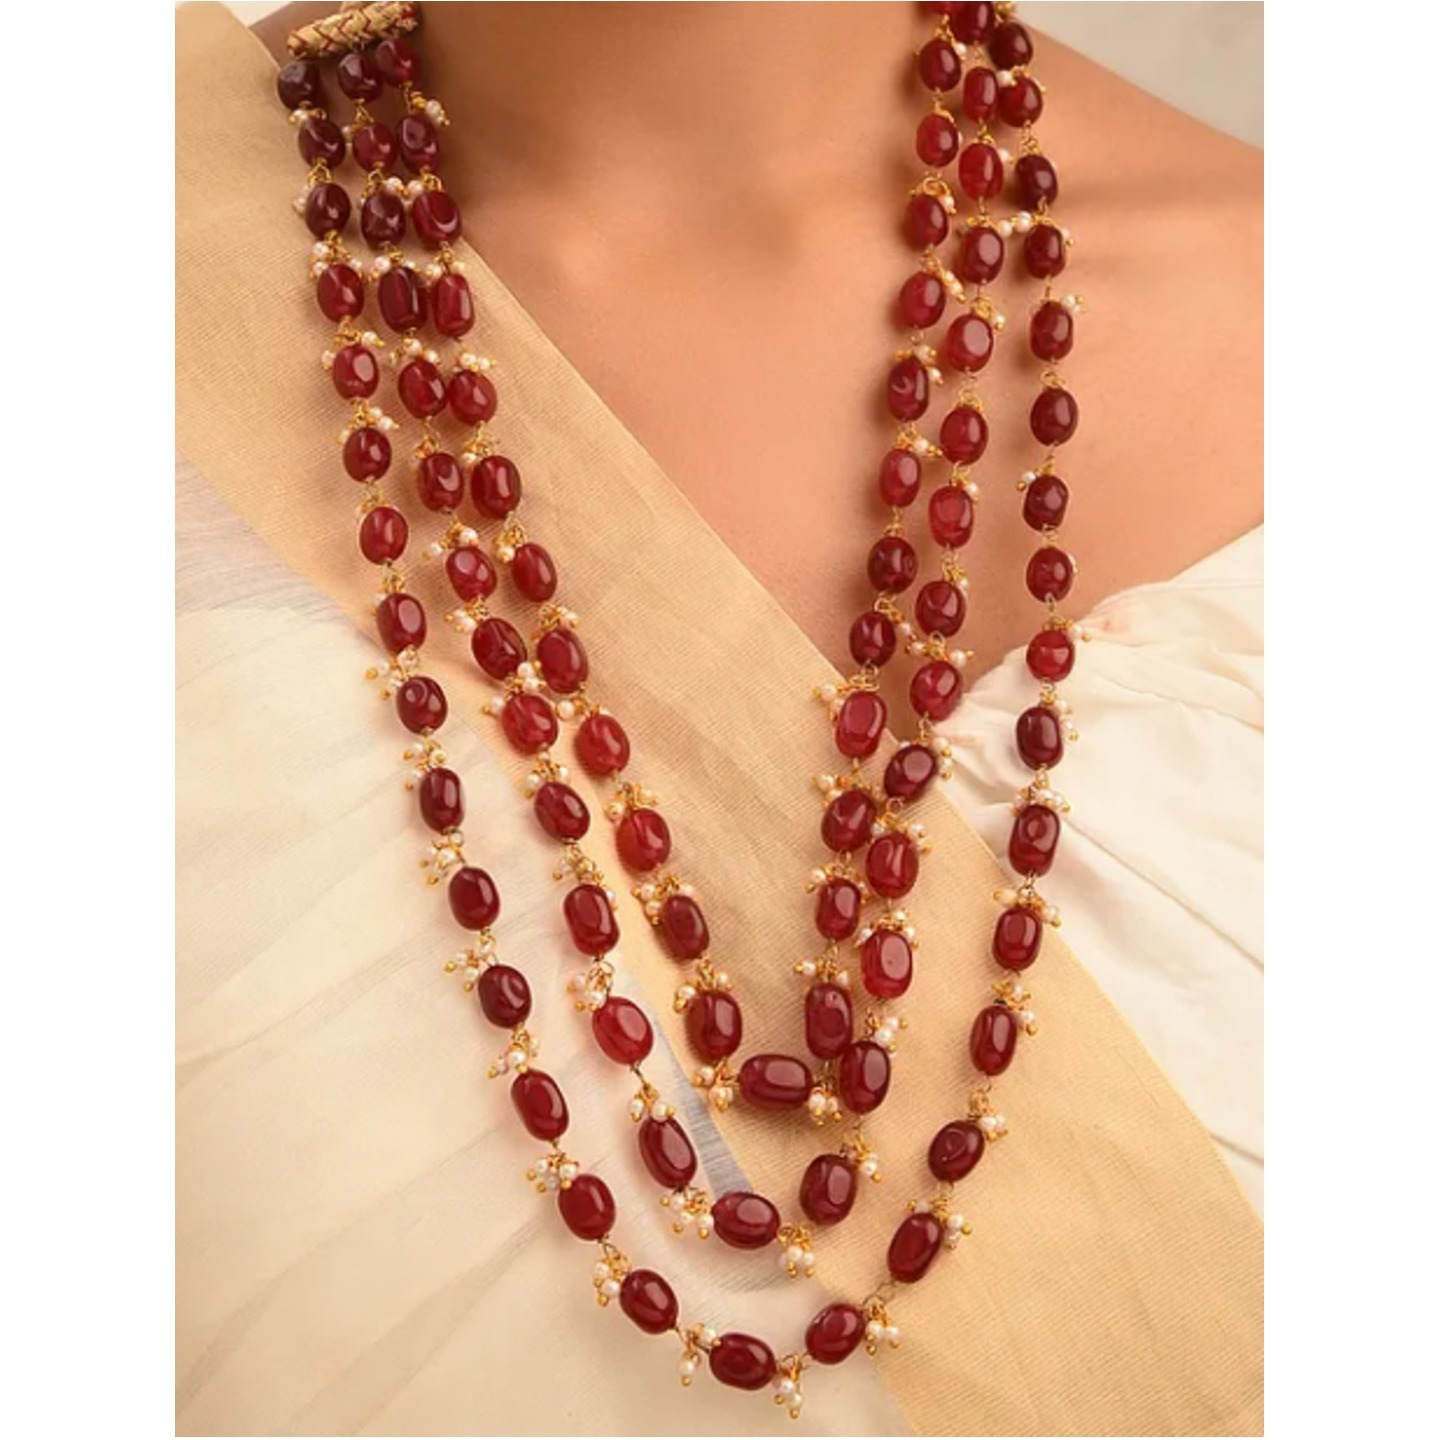 Red Beaded Layered Necklace with Pearls